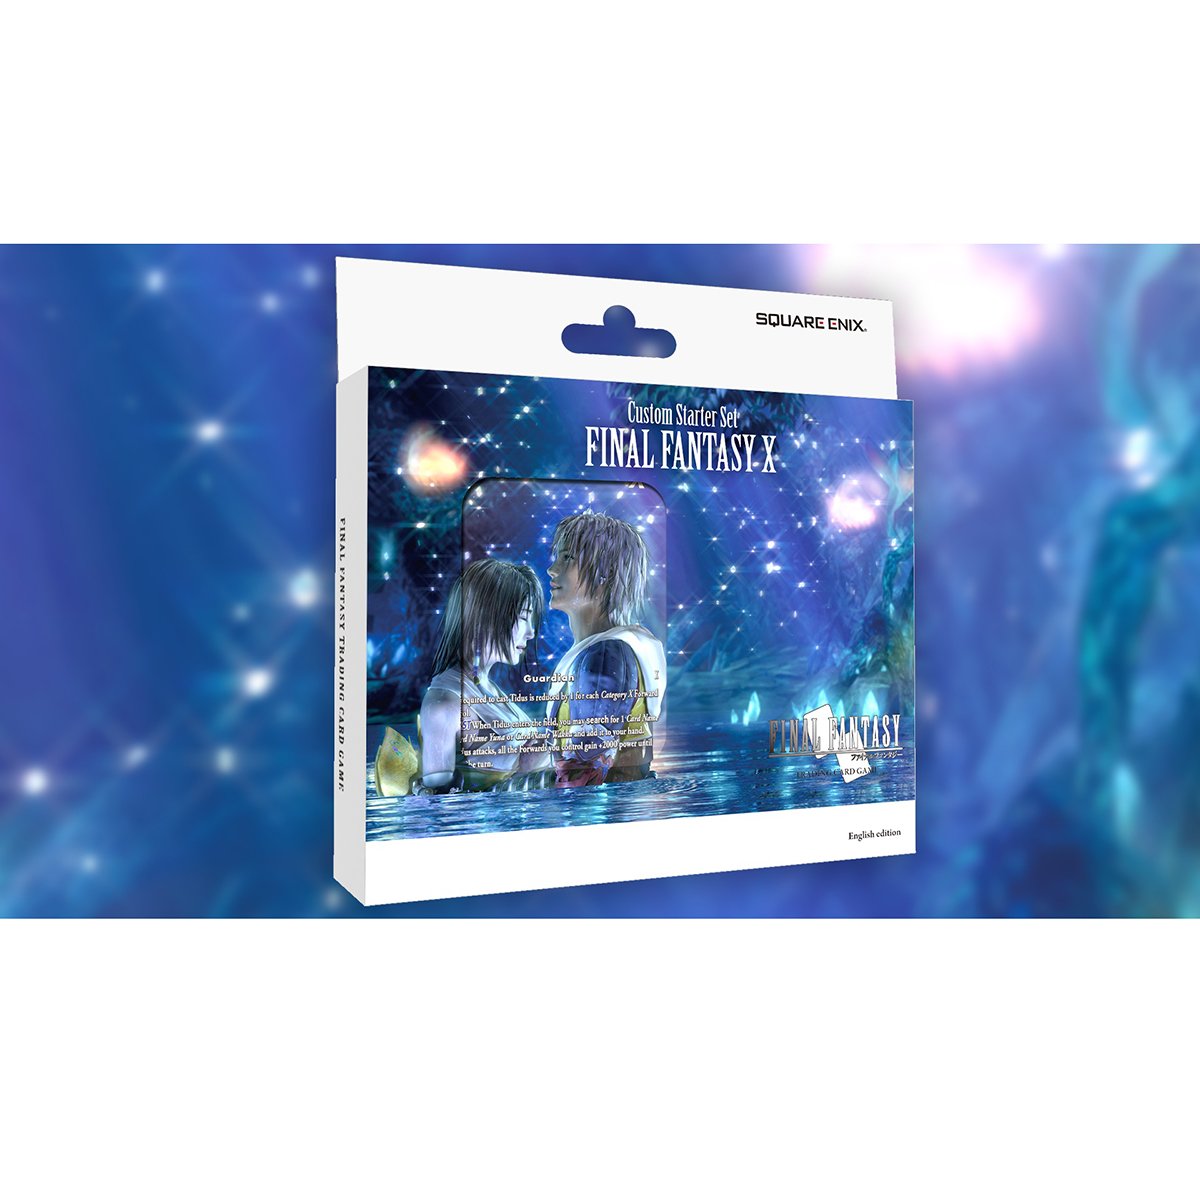 Final Fantasy TCG: Custom Starter Set FINAL FANTASY X-Square Enix-Ace Cards &amp; Collectibles